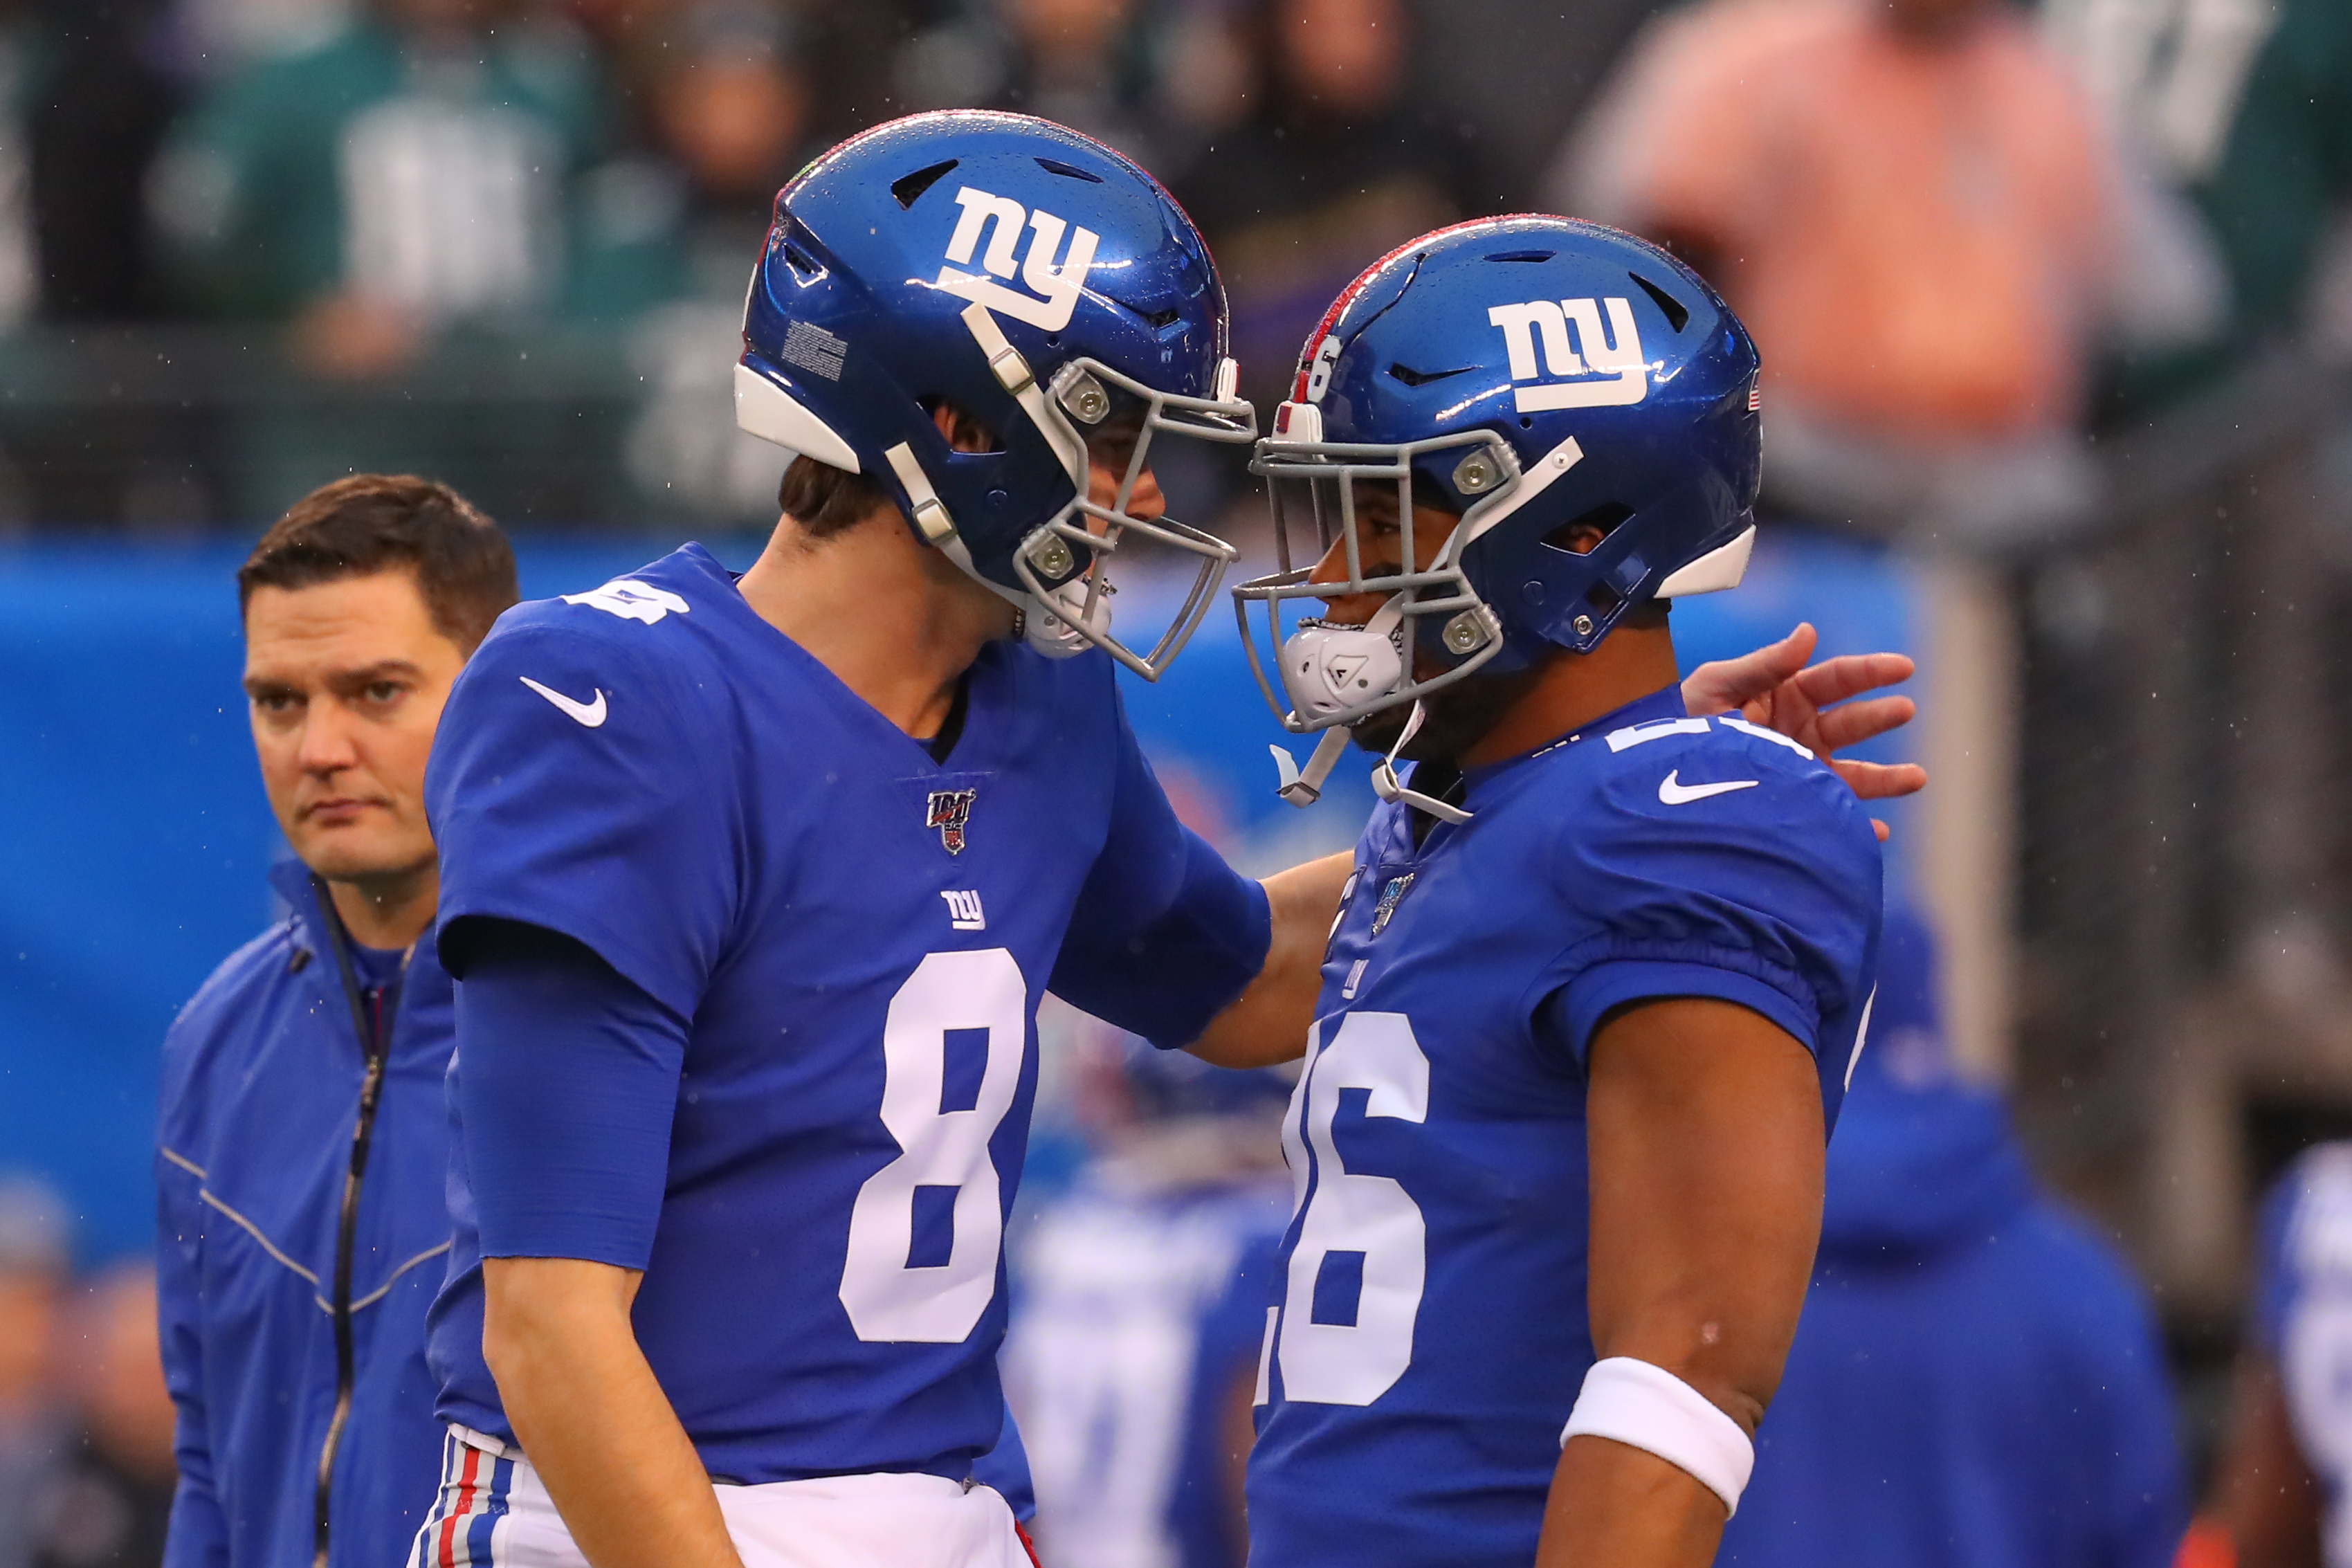 New York Giants quarterback Daniel Jones (8) and New York Giants running back Saquon Barkley (26) prior to the National Football League game between the New York Giants and the Philadelphia Eagles on December 29, 2019 at MetLife Stadium in East Rutherford, NJ.